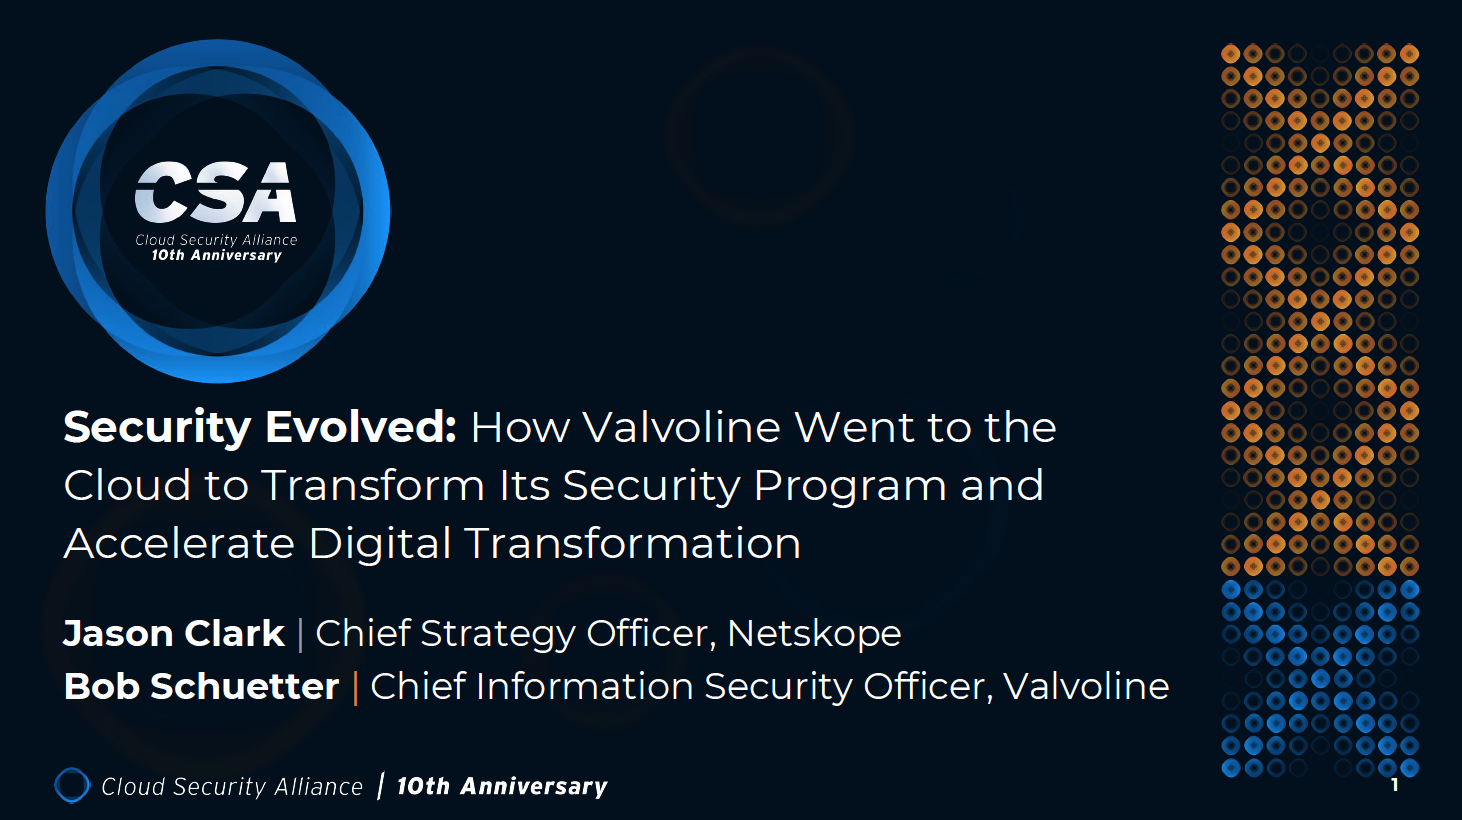 Security Re-Defined: How Valvoline Went to the Cloud to Transform its Security Program and Accelerate Digital Transformation